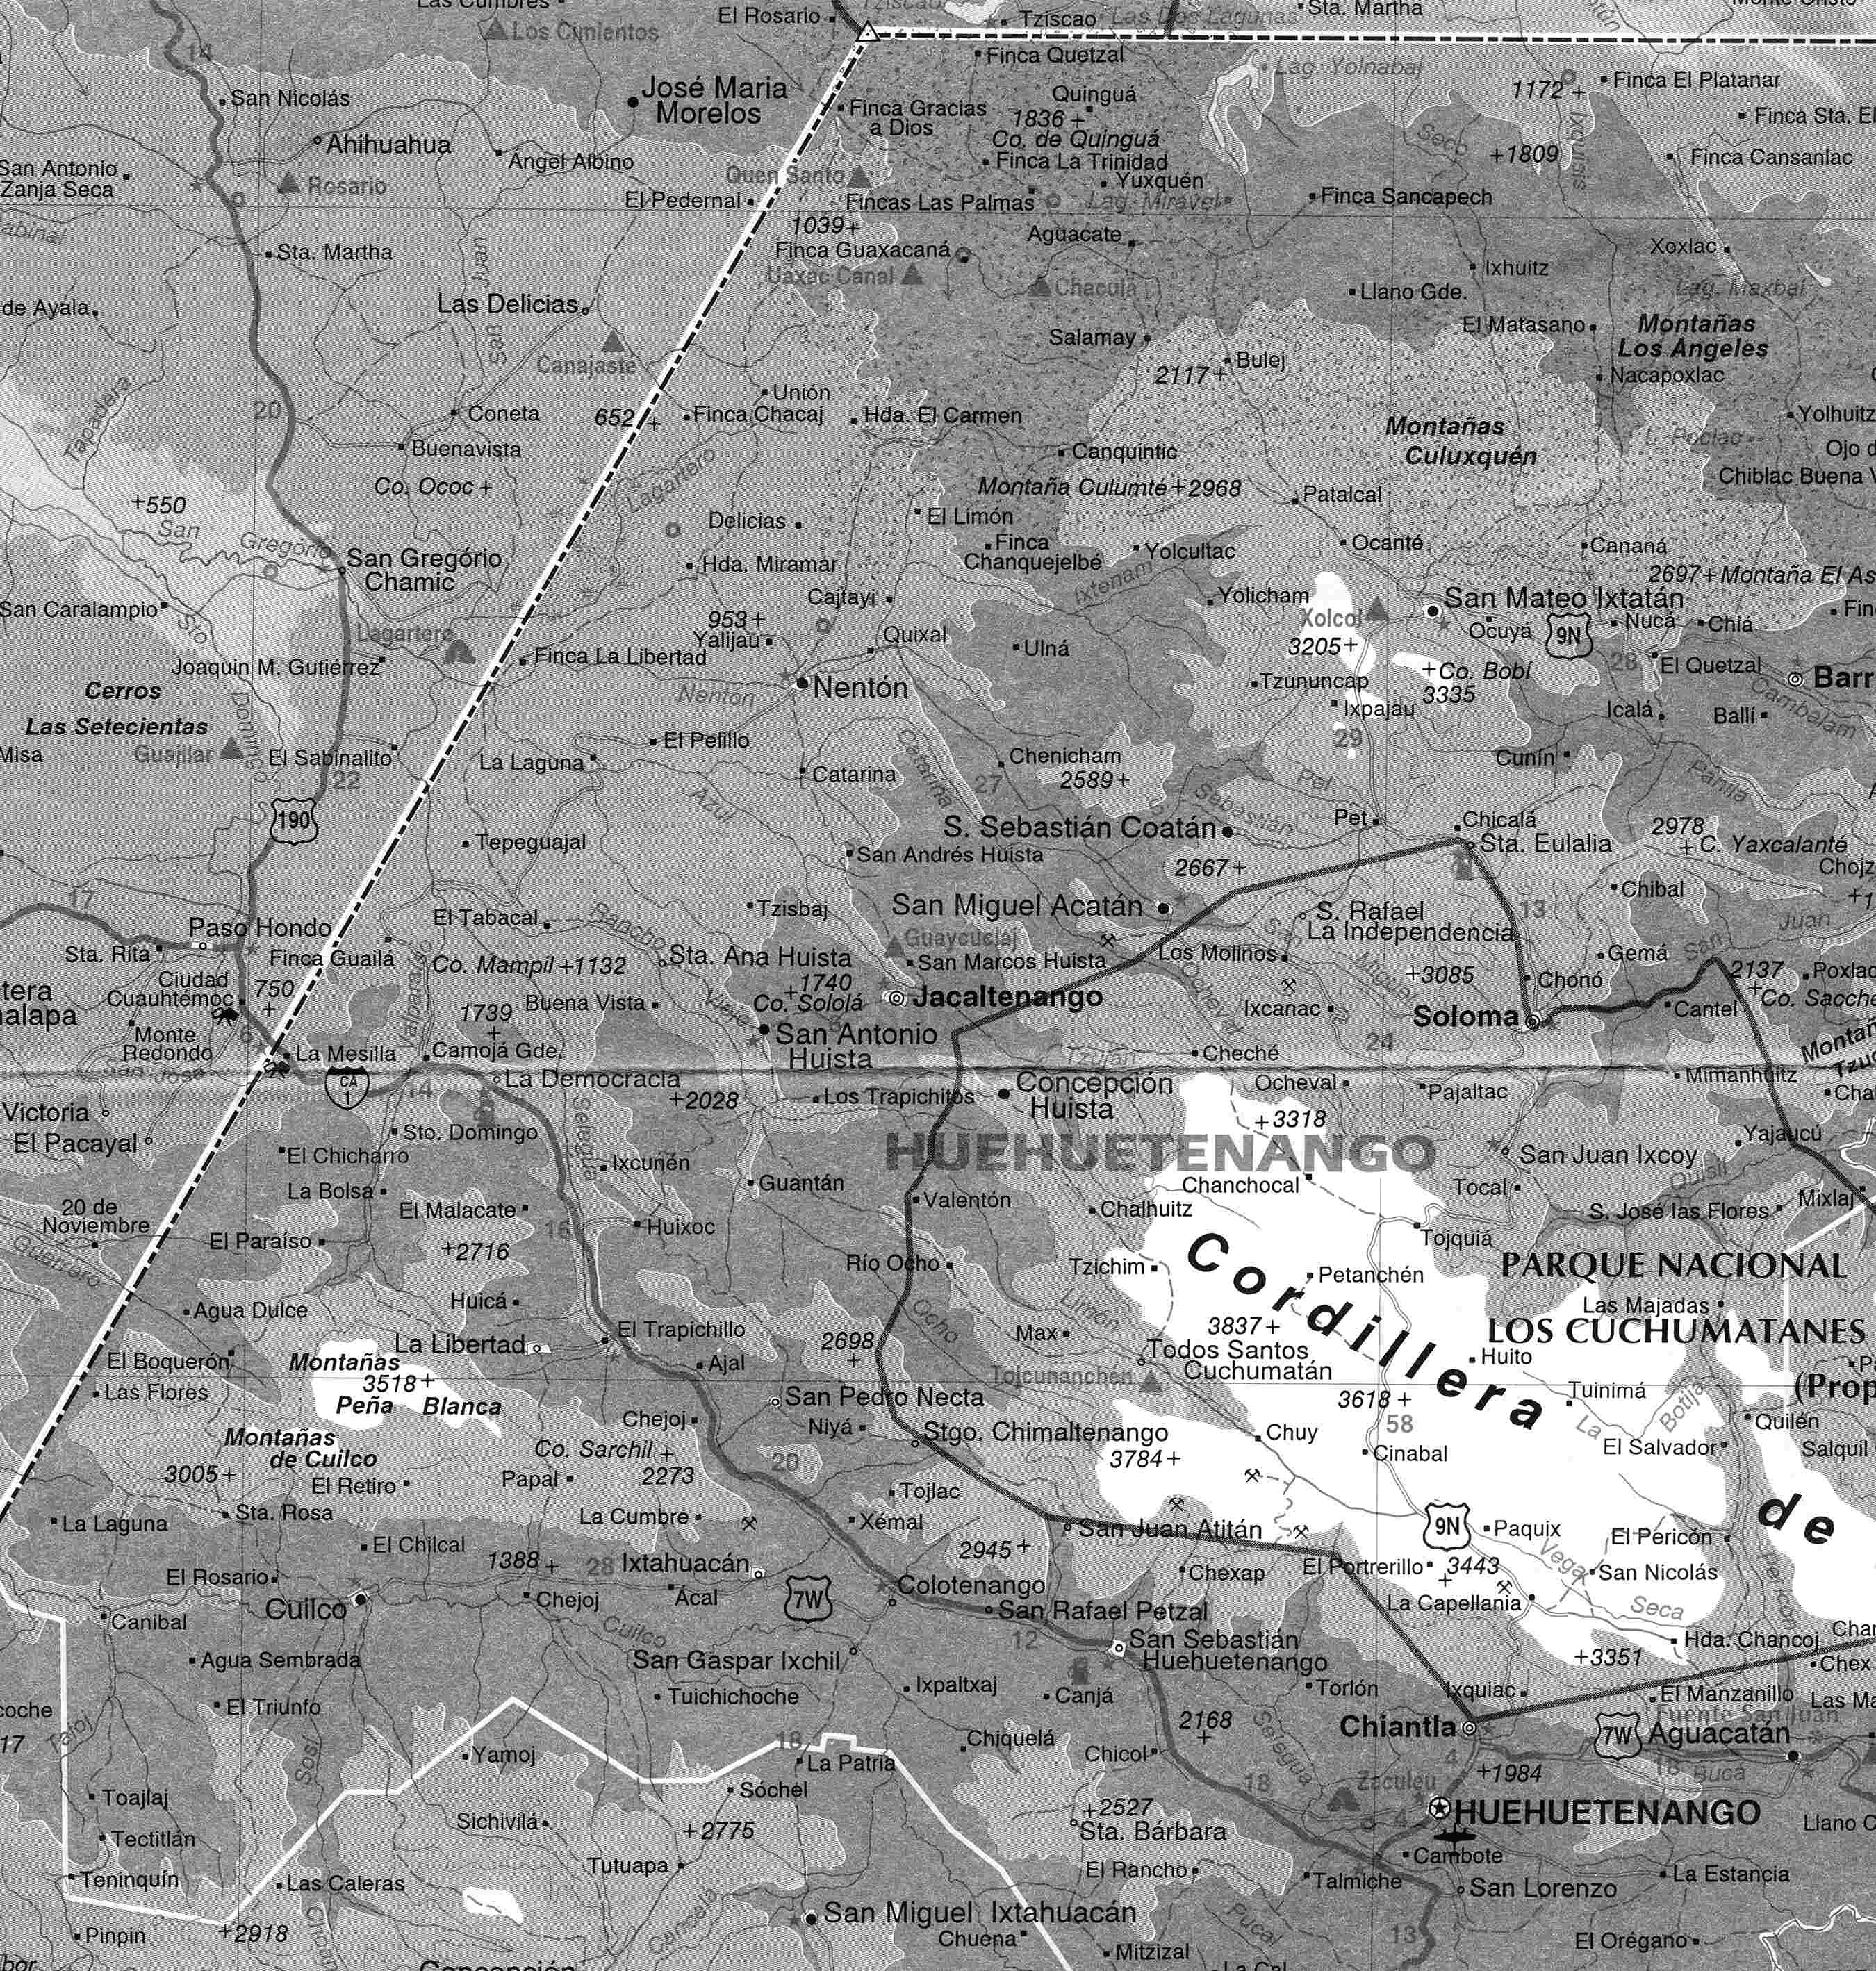 Figure 1.1. Western parts of the Departamento de Huehuetenango, Guatemala, bordering the Mexican state of Chiapas. After Traveller’s Reference Map of Guatemala and El Salvador. International Map Productions, Vancouver, BC, Canada. ISBN 0-921463-64-2.